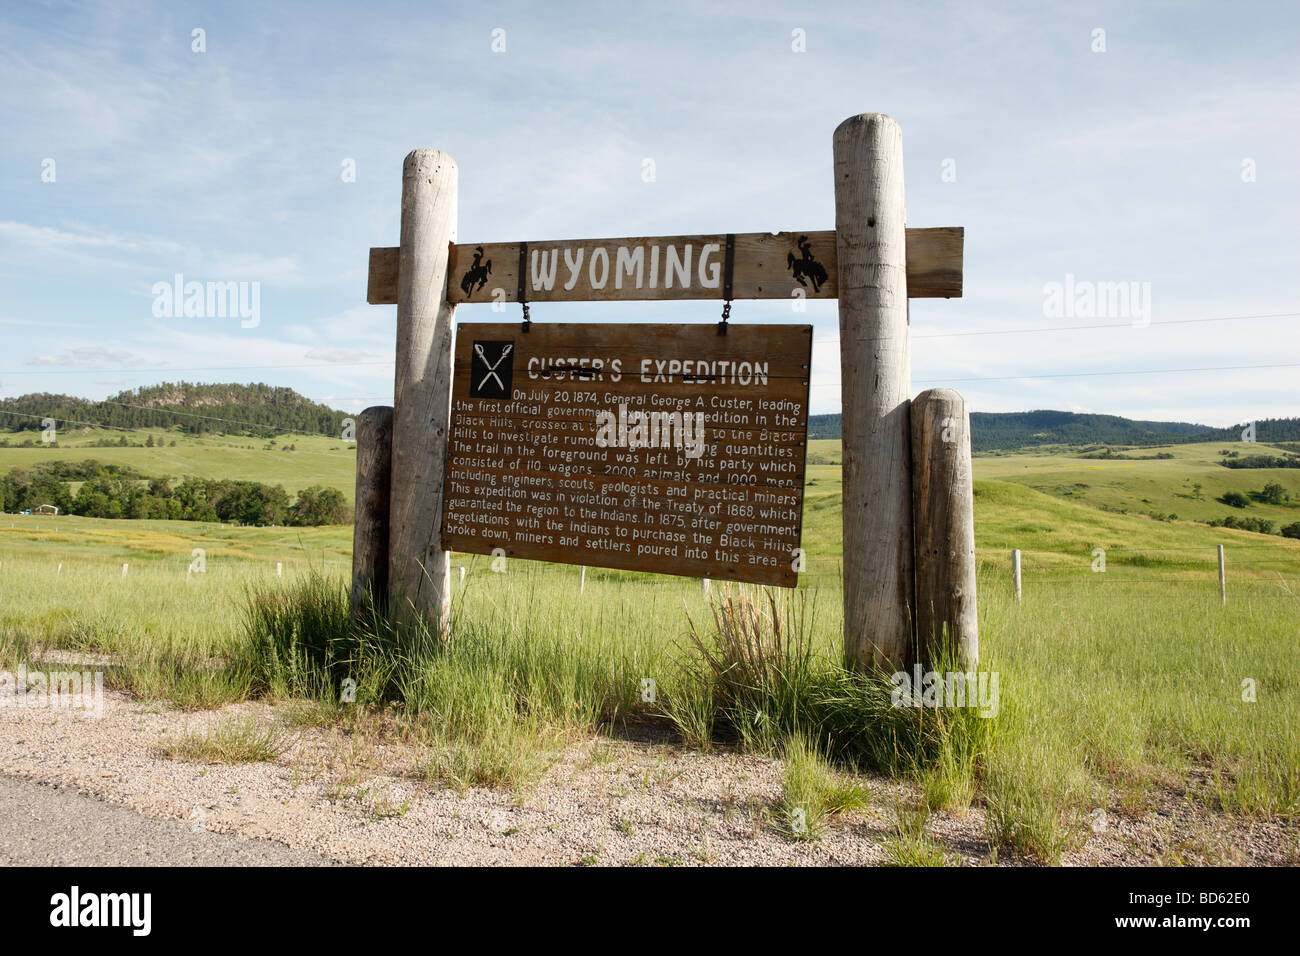 A sign in rural Wyoming near the SD border describing a July 20th, 1874 crossing point of General George A. Custer's expedition. Stock Photo